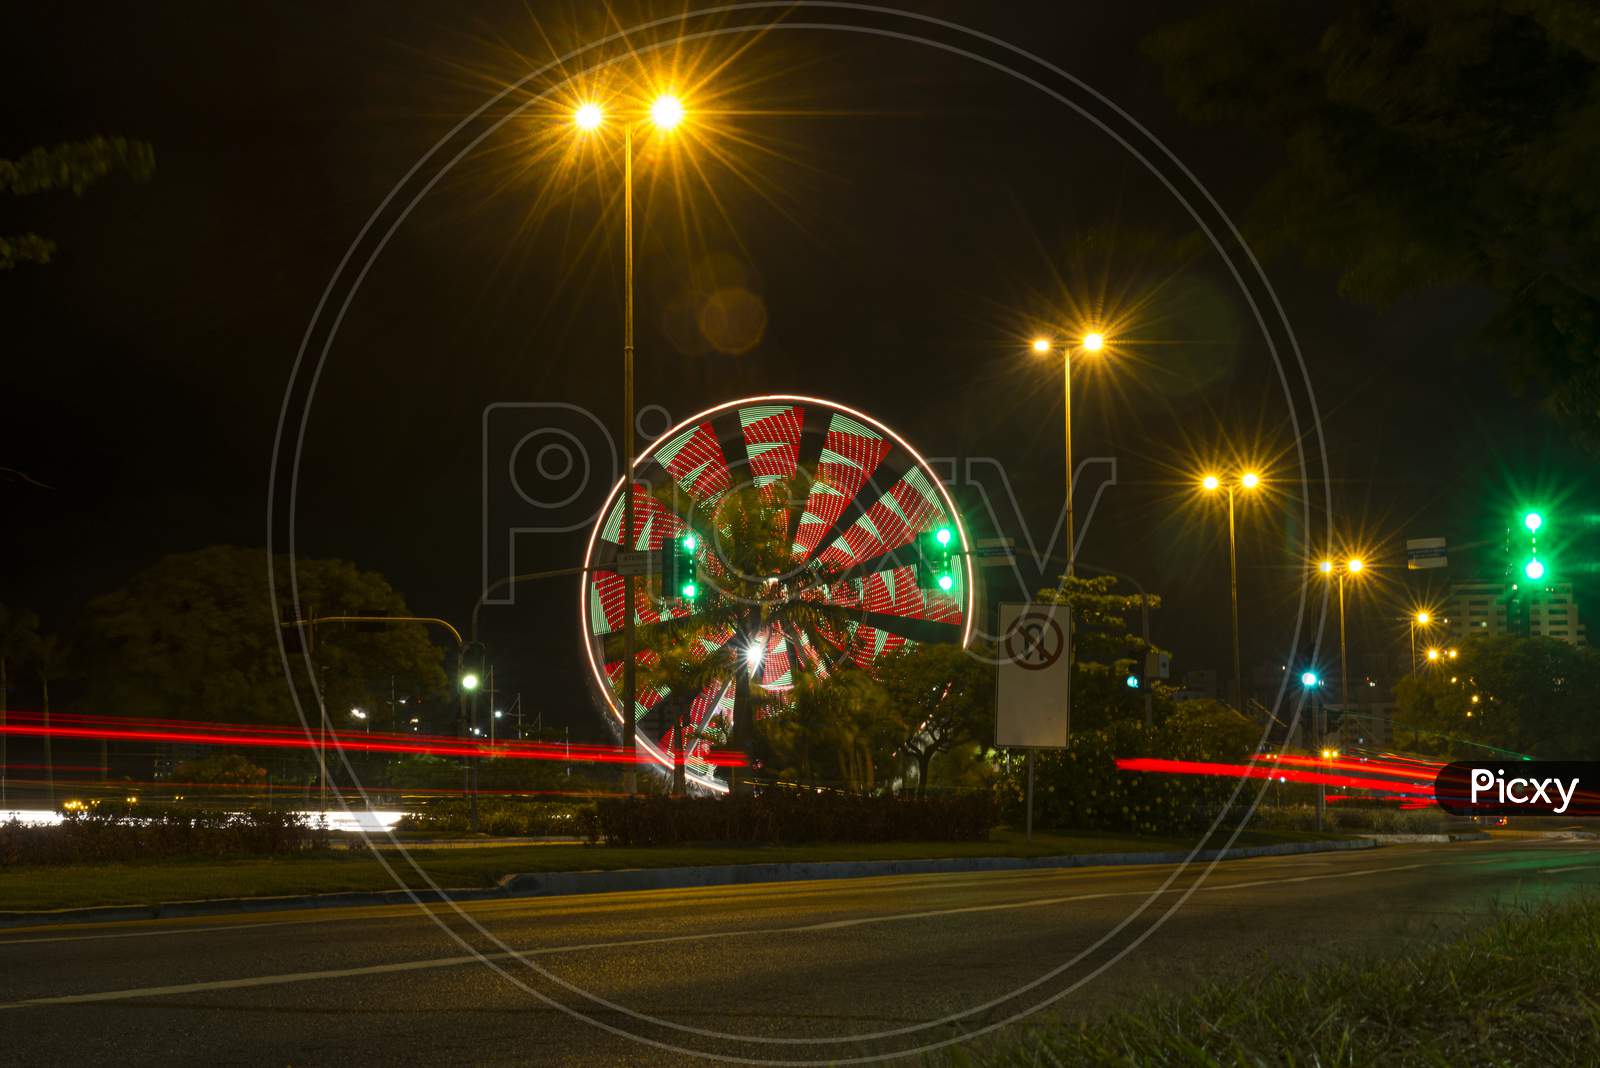 Long Exposure Of Colorful Ferris Wheel And Light Trails On The Expressway Road At Night.